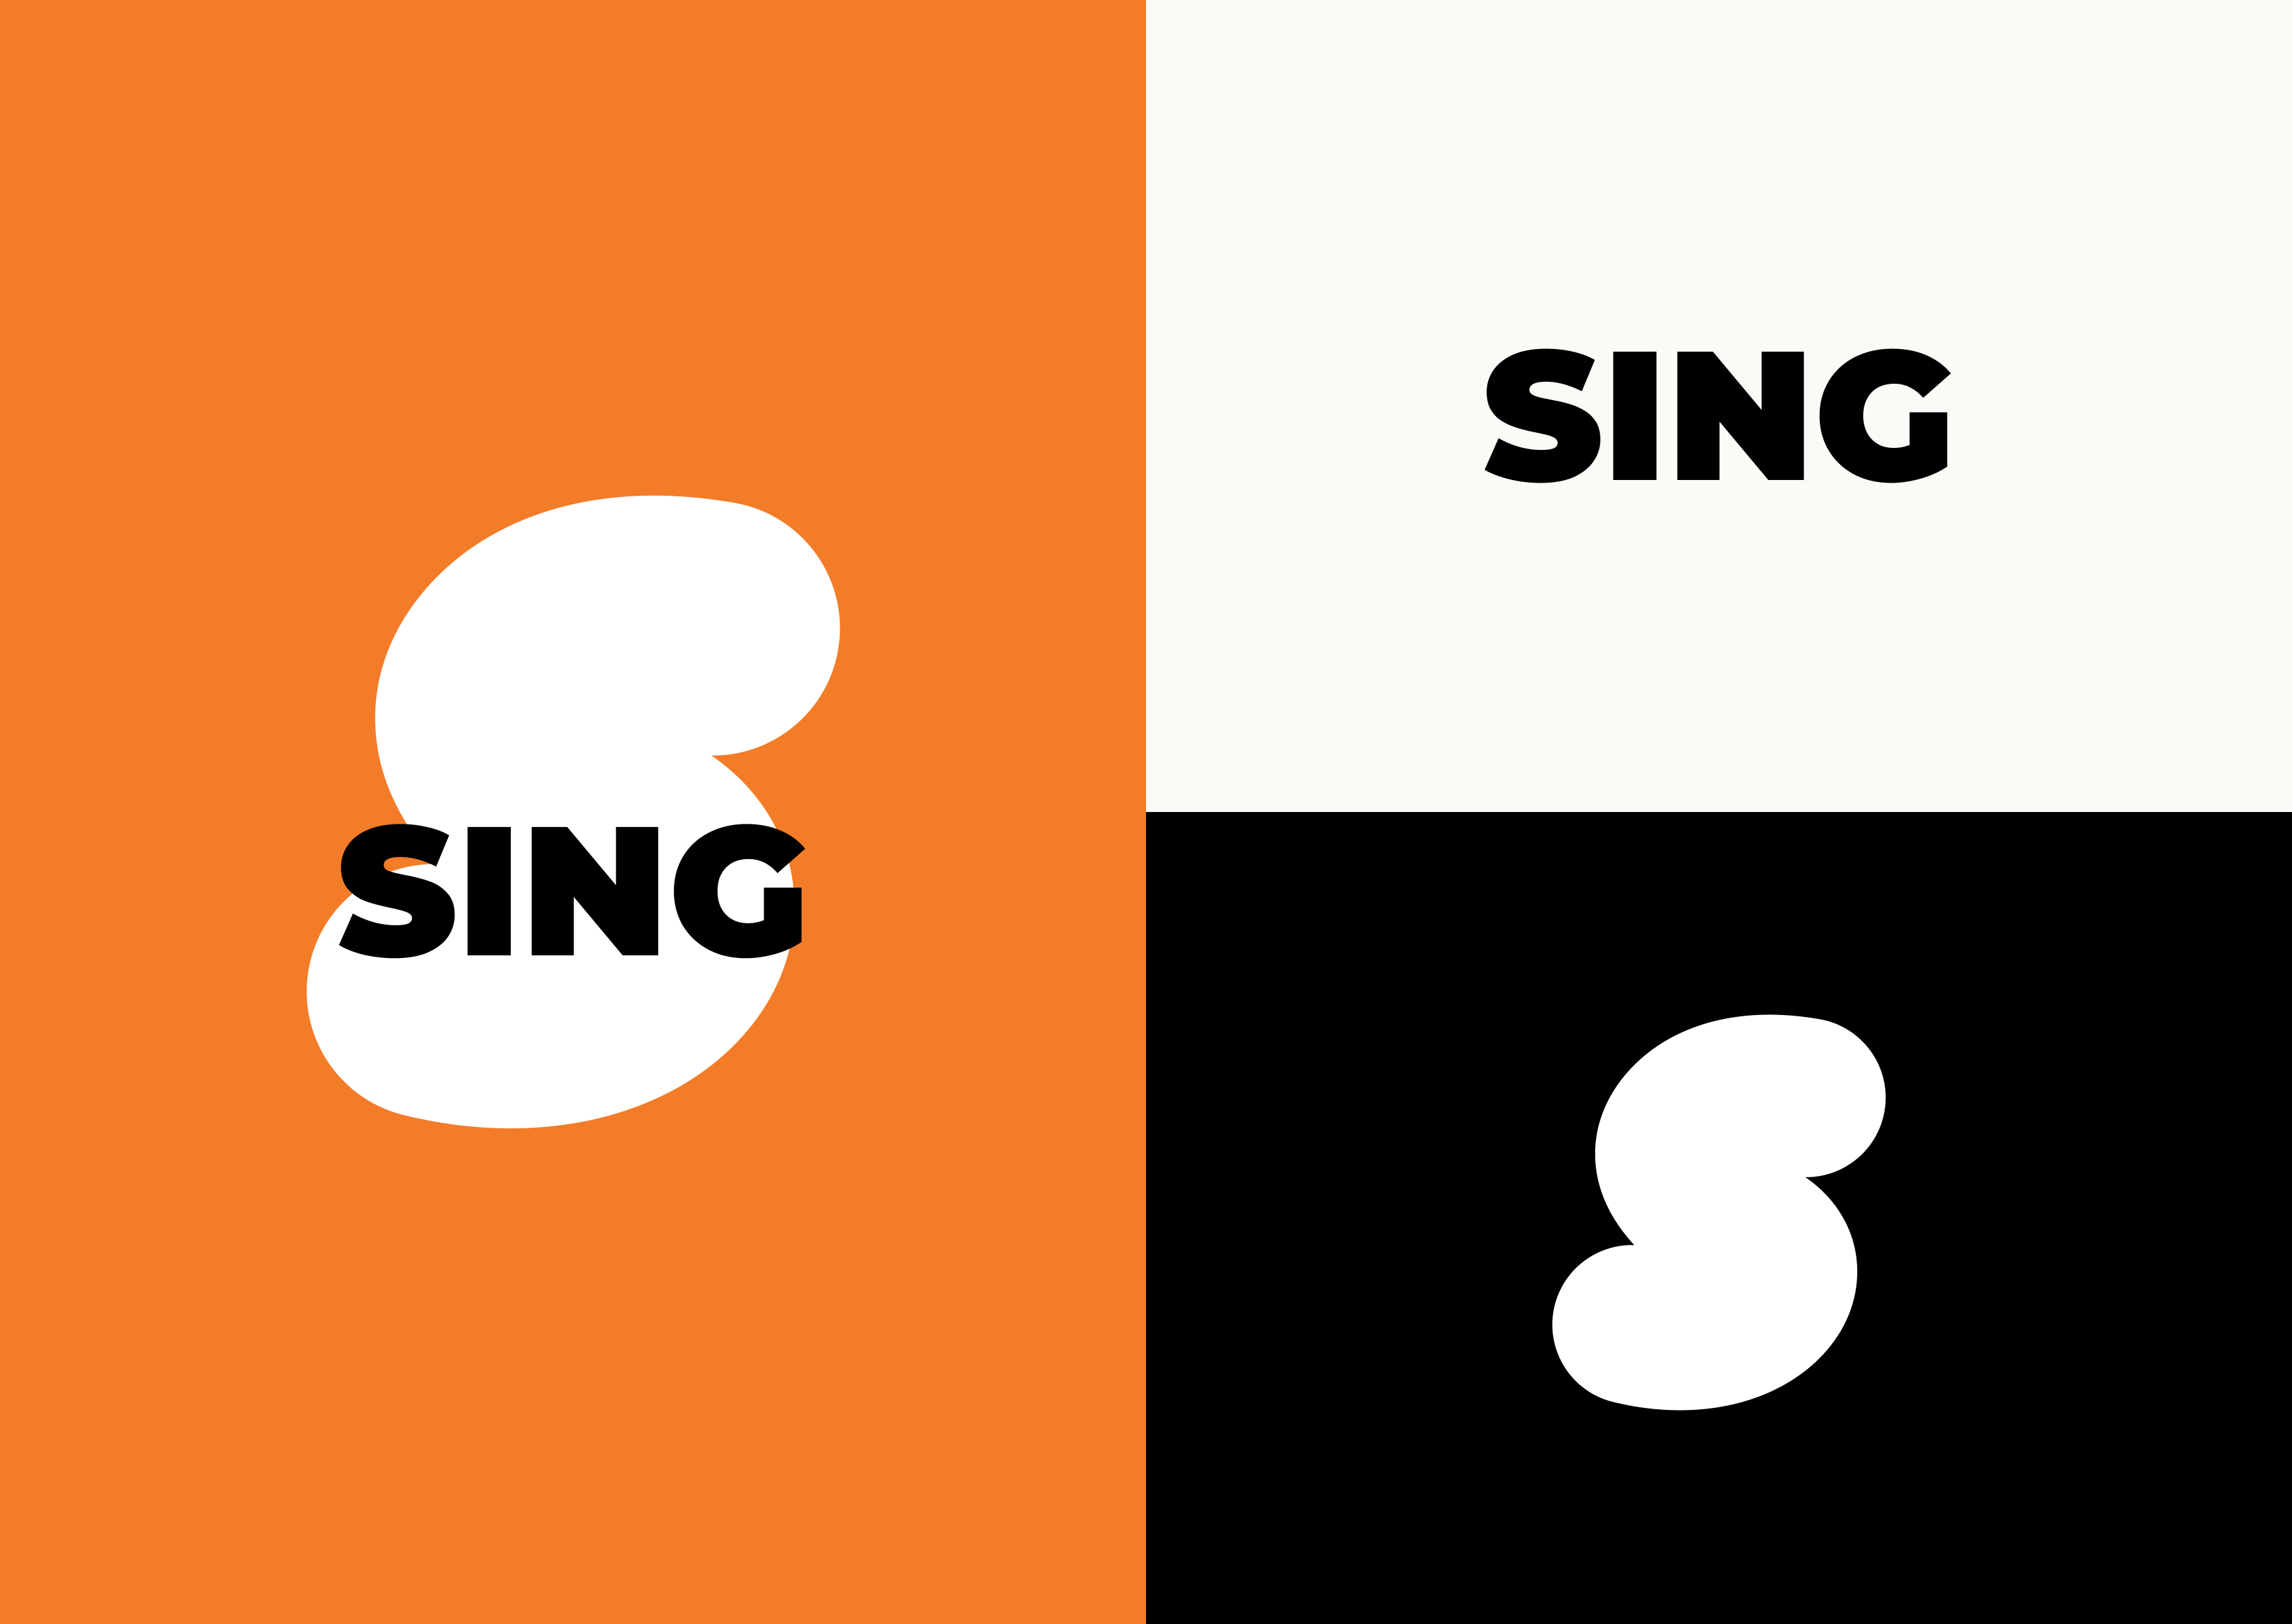 The Board Game “Sing” And Its Branding